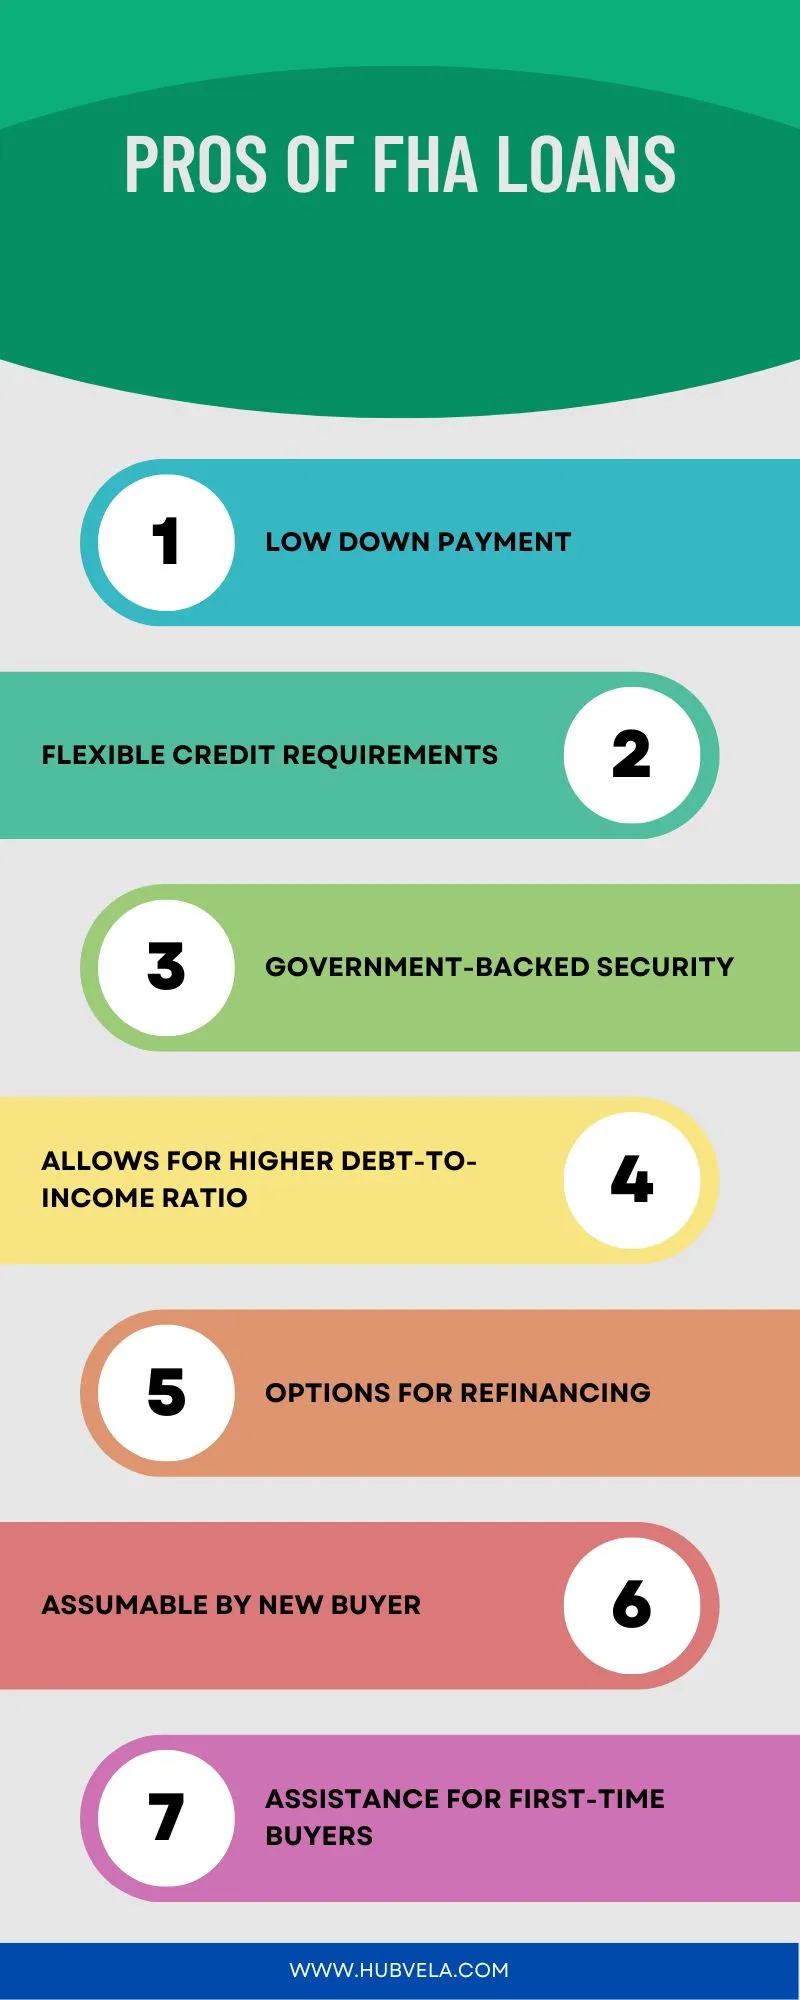 Pros Of FHA Loans Infographic